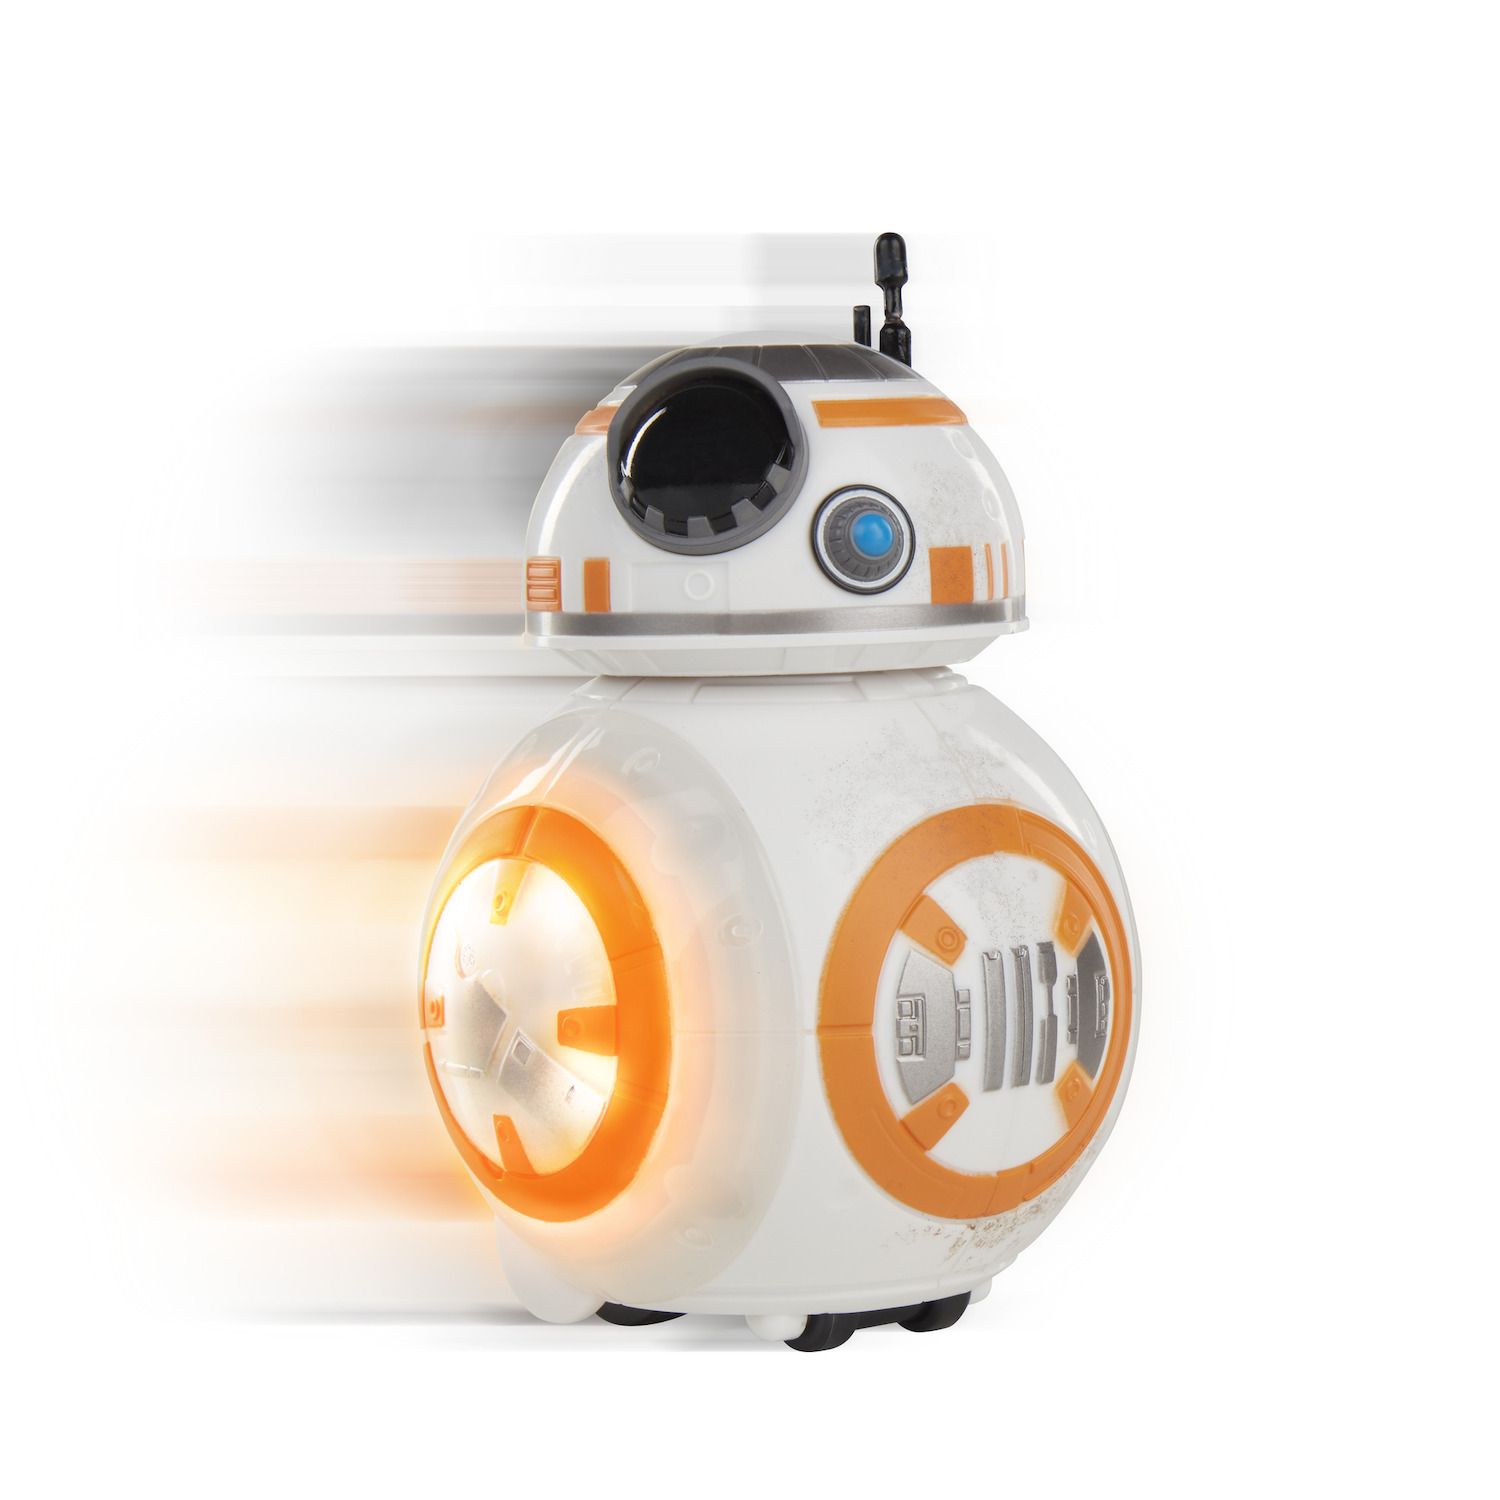 bb8 electronic toy